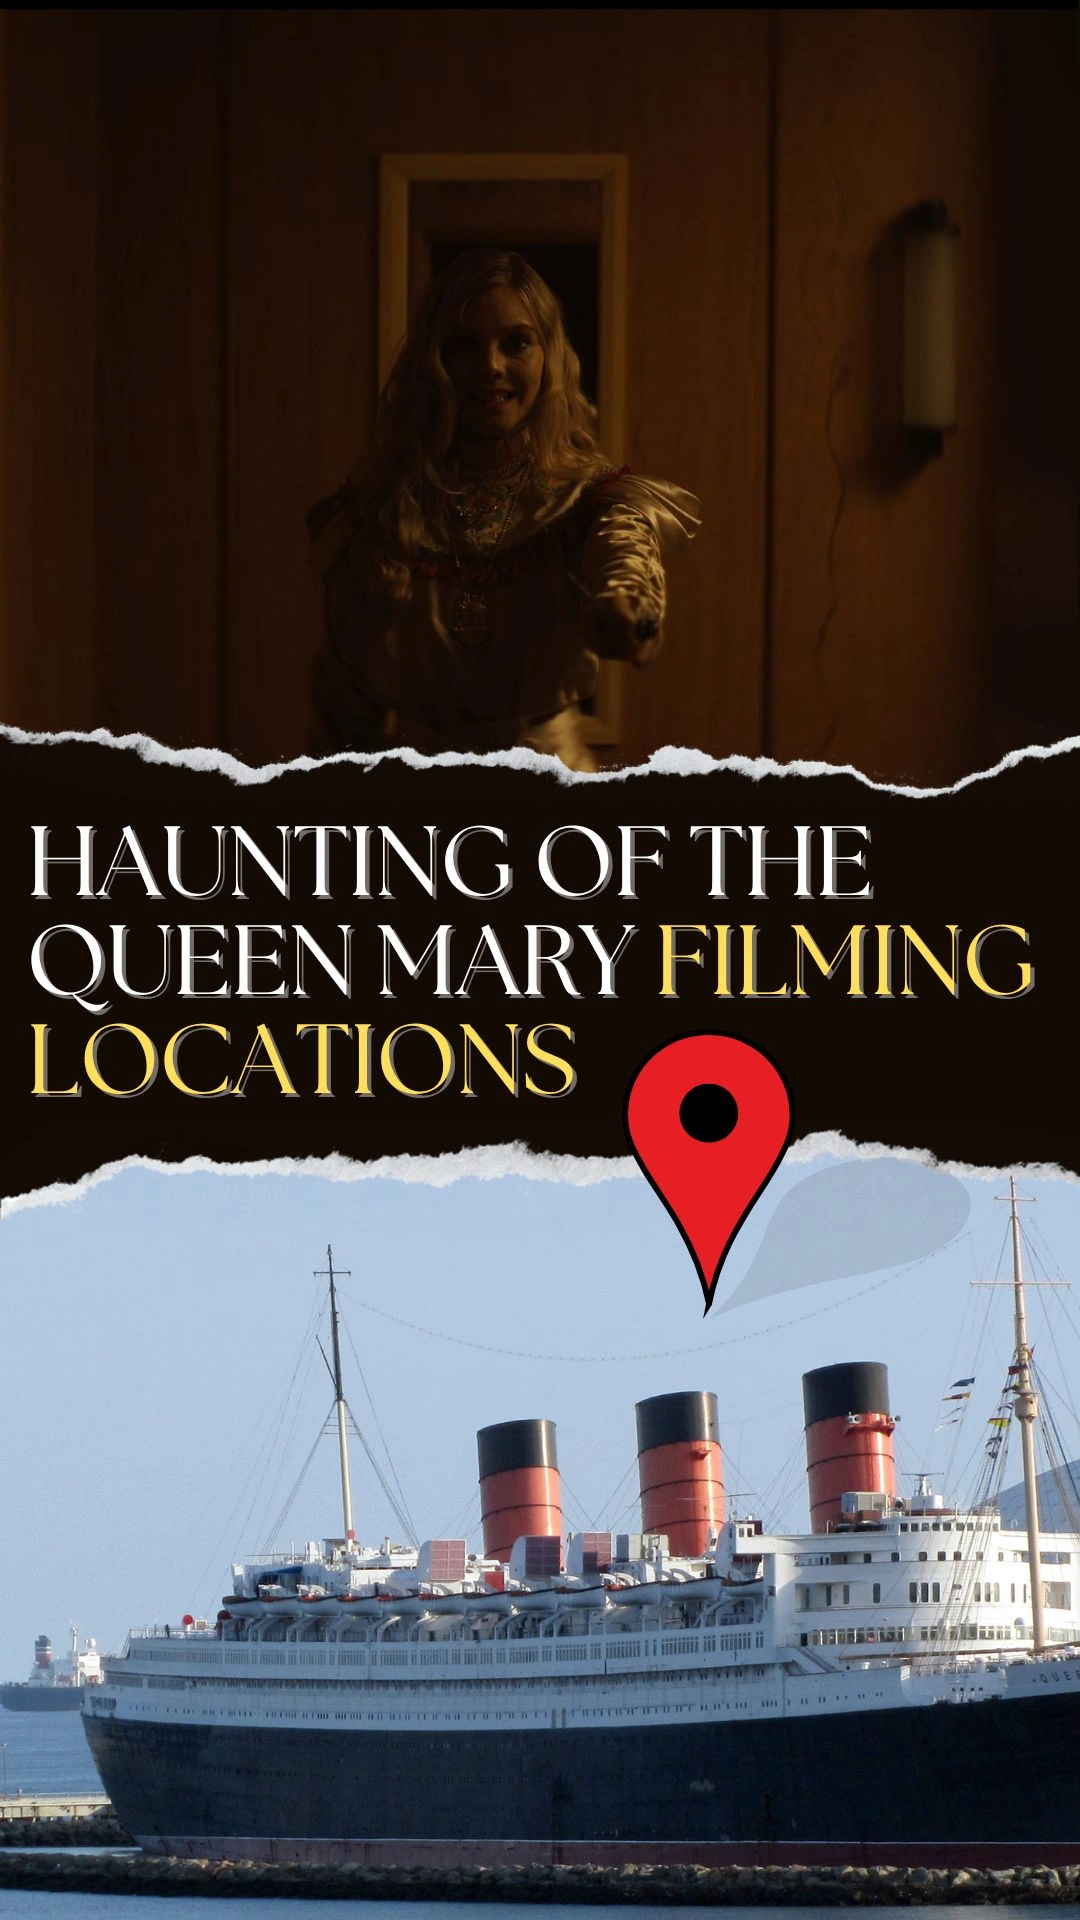 Haunting of the Queen Mary Filming Locations